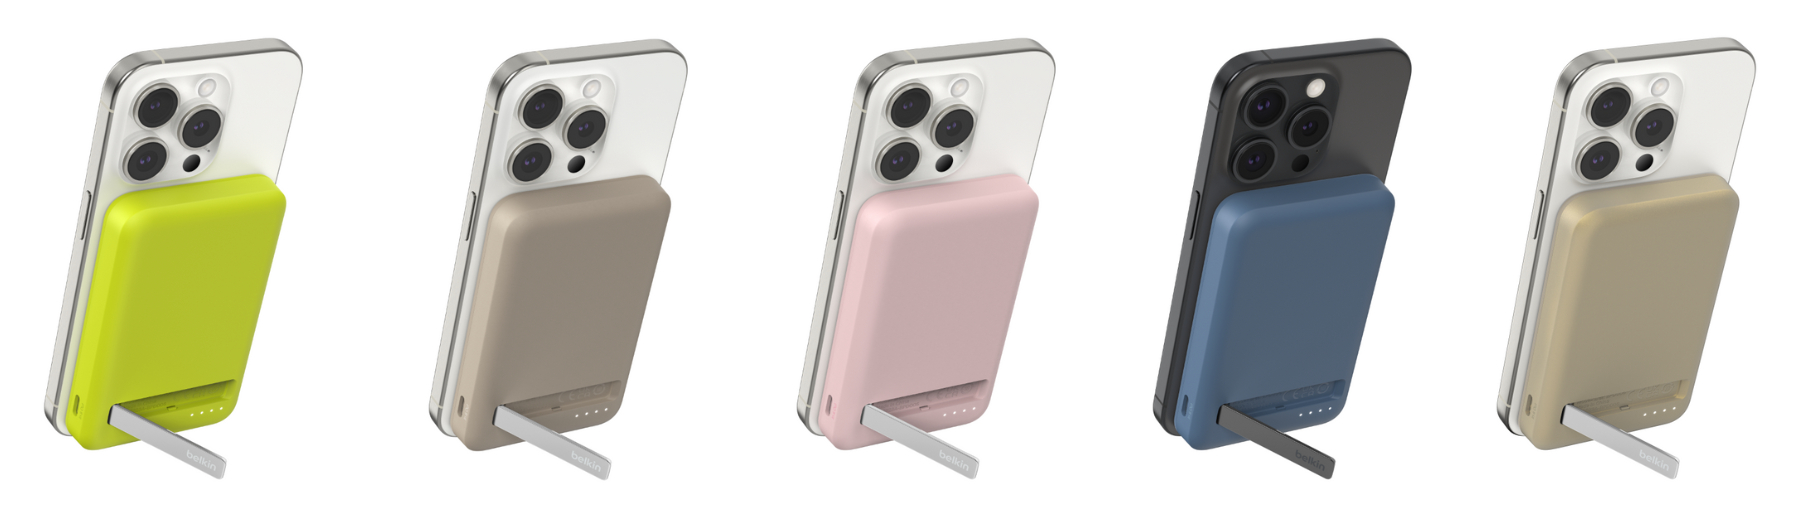 Belkin Unveils Colorful New Lineup of Qi2 Wireless Charging Power Banks